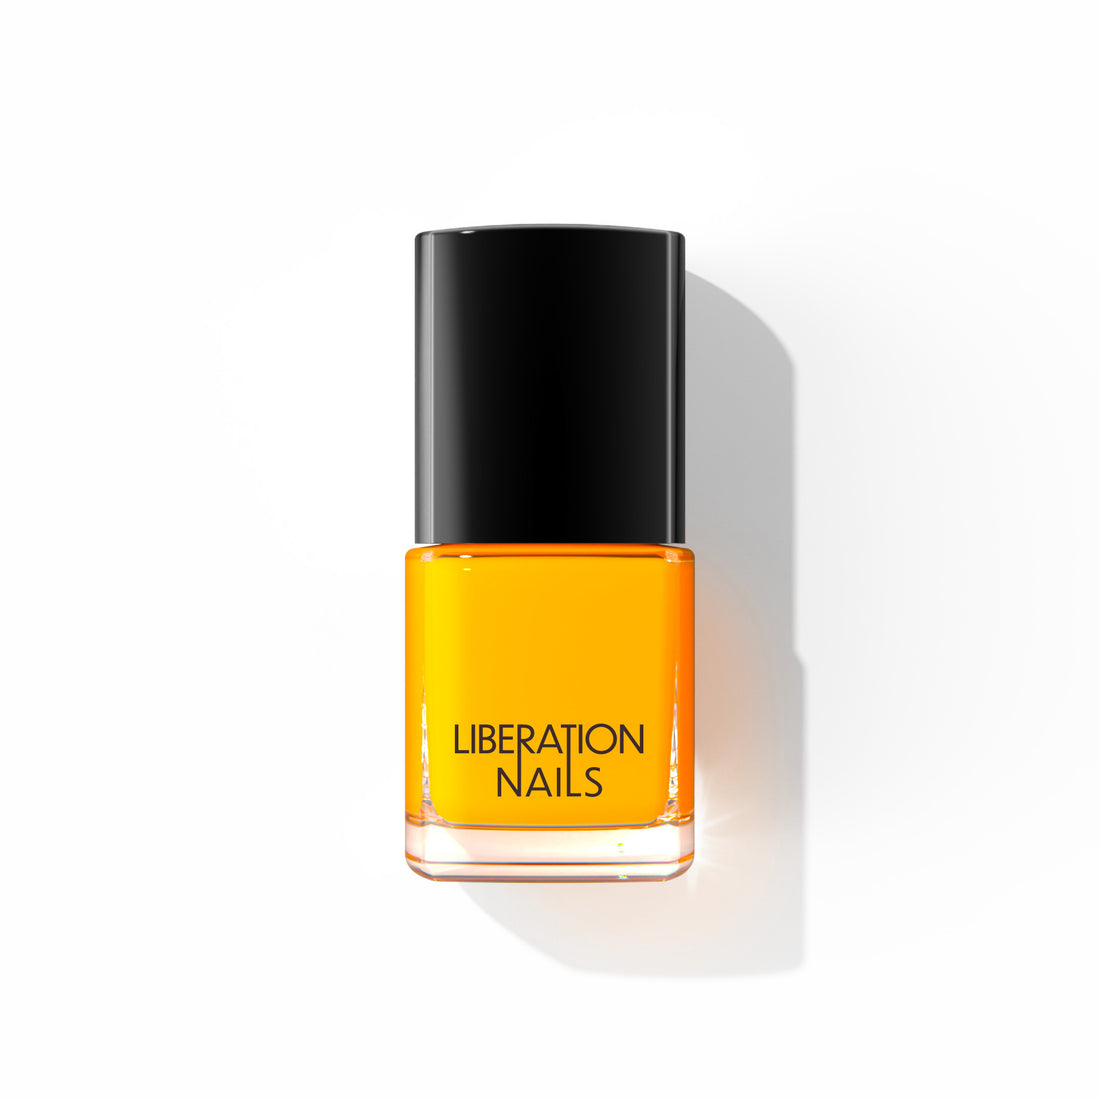 A bottle of Liberation Nails nail polish in a sunny yellow color, Golden Hour.